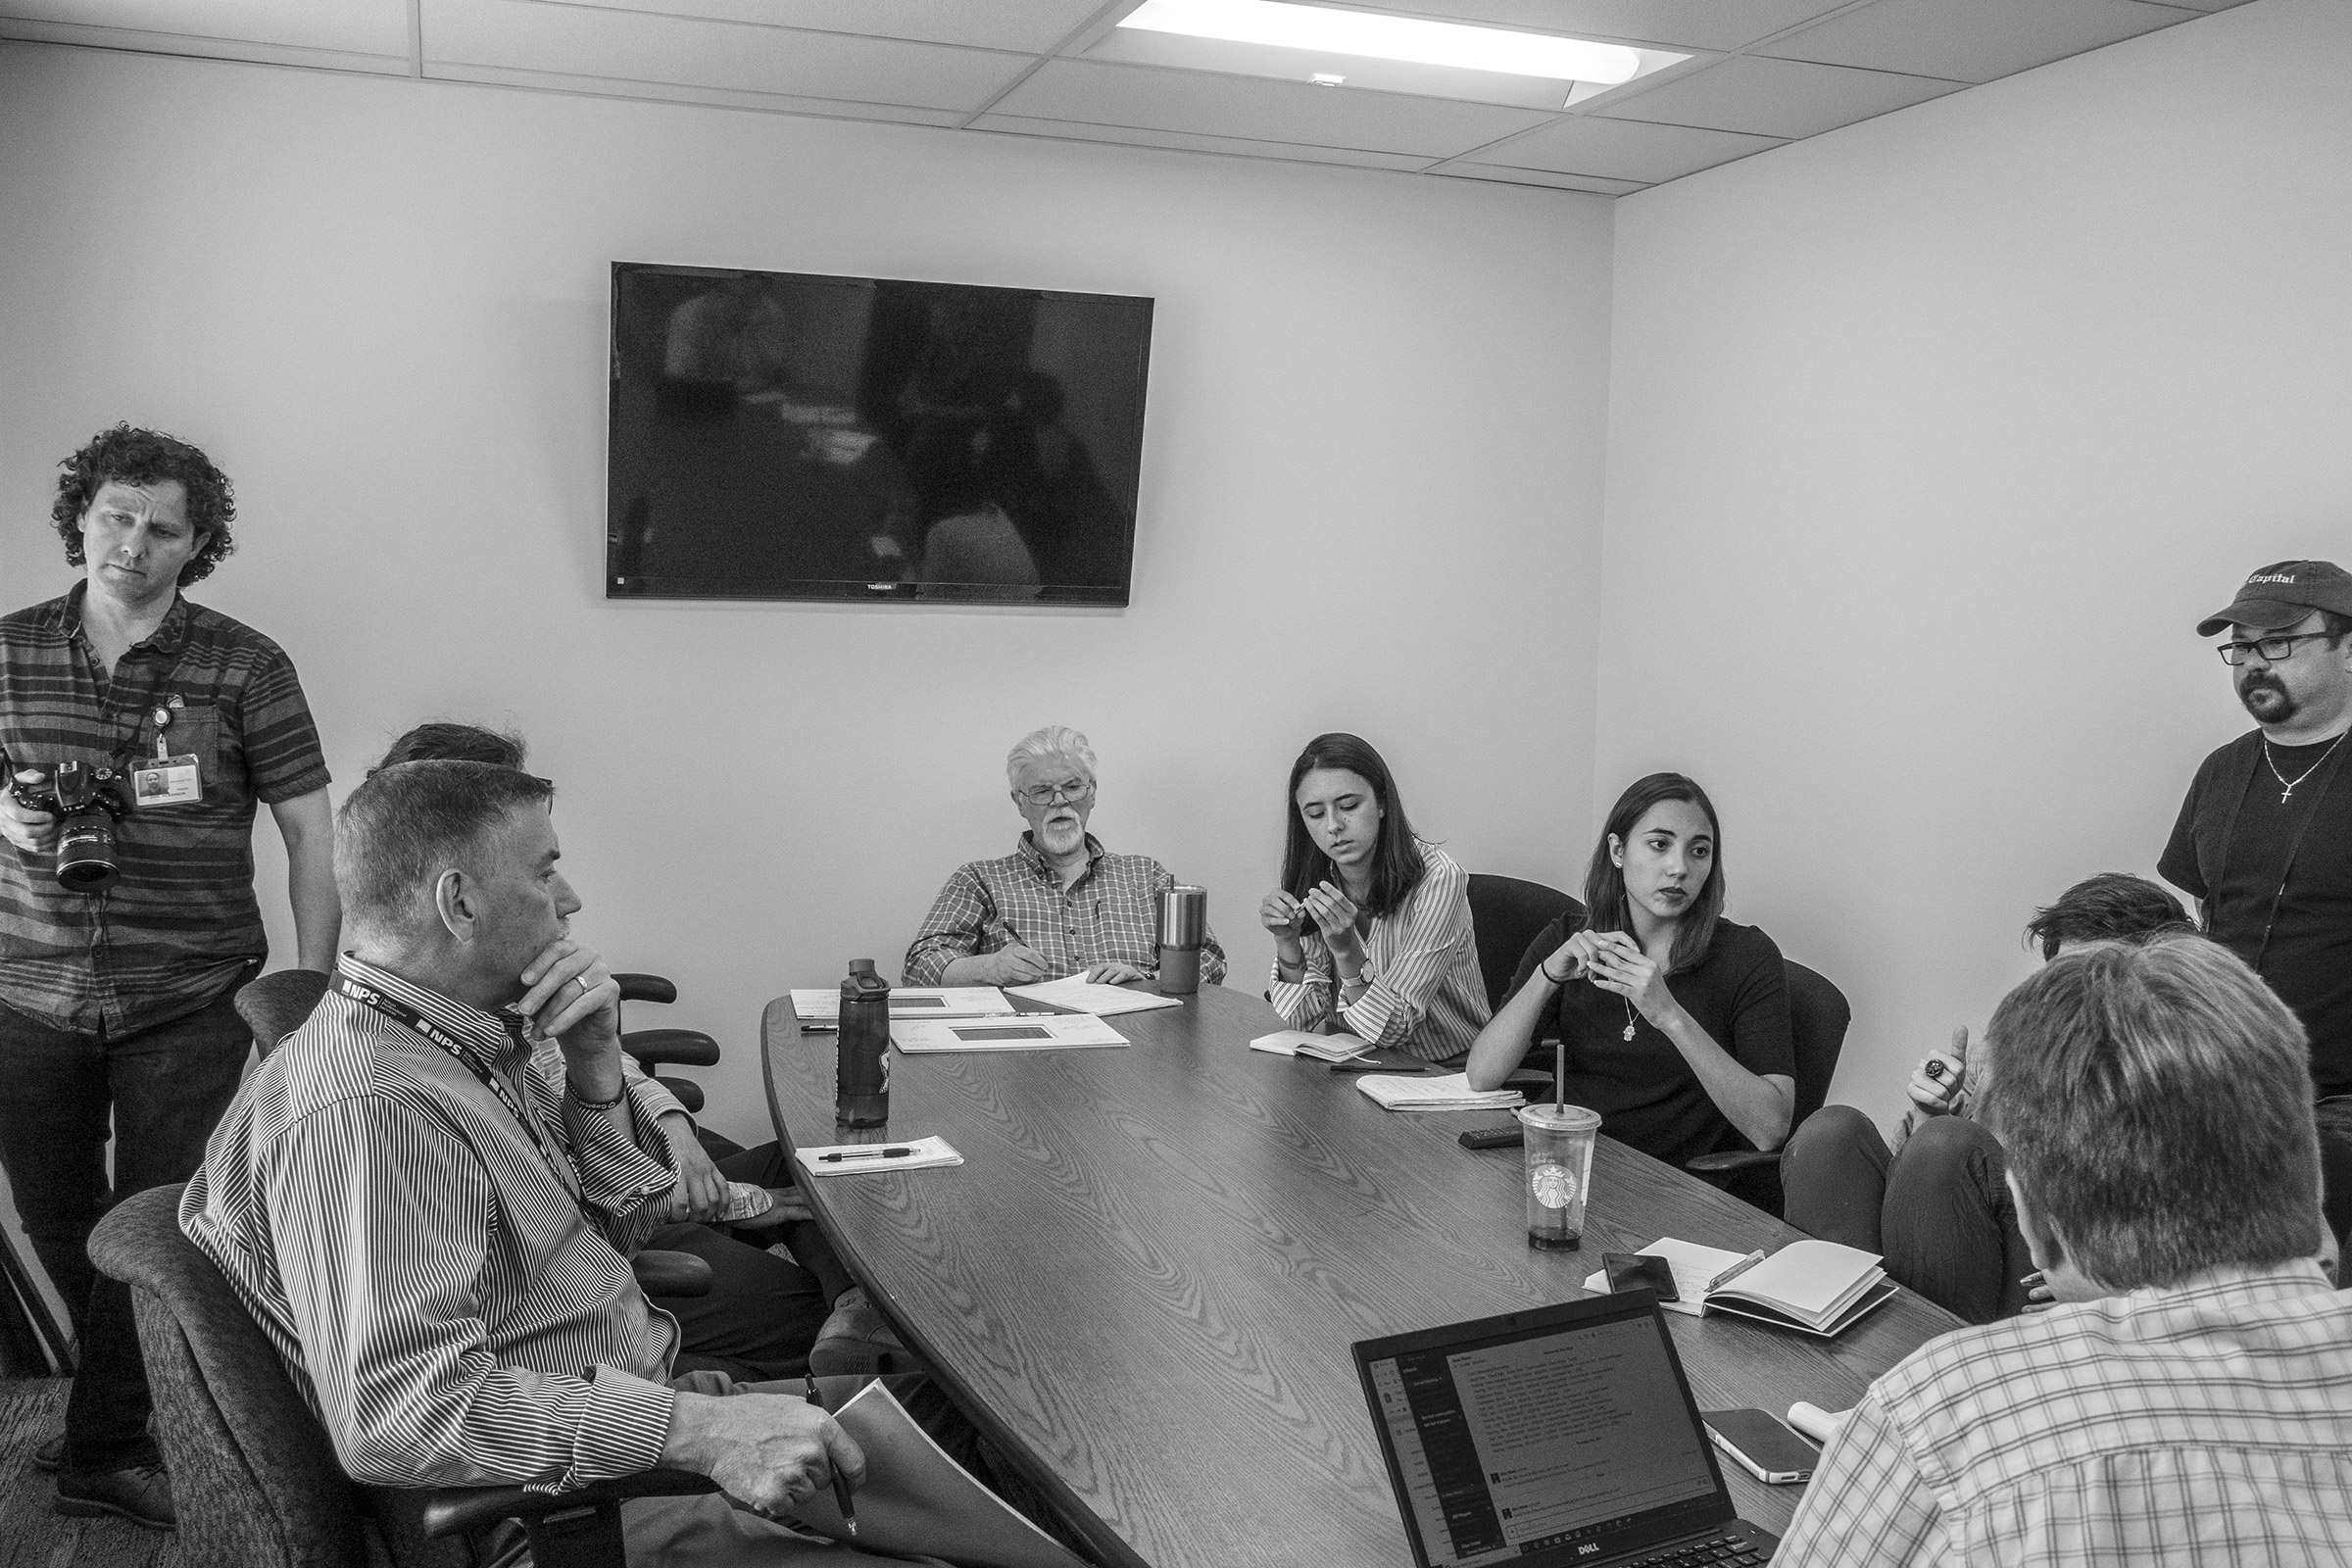 The staff of the Capital Gazette at a meeting about how to cover the one year anniversary of the shooting, June 5, 2019. (Moises Saman—Magnum Photos for TIME)